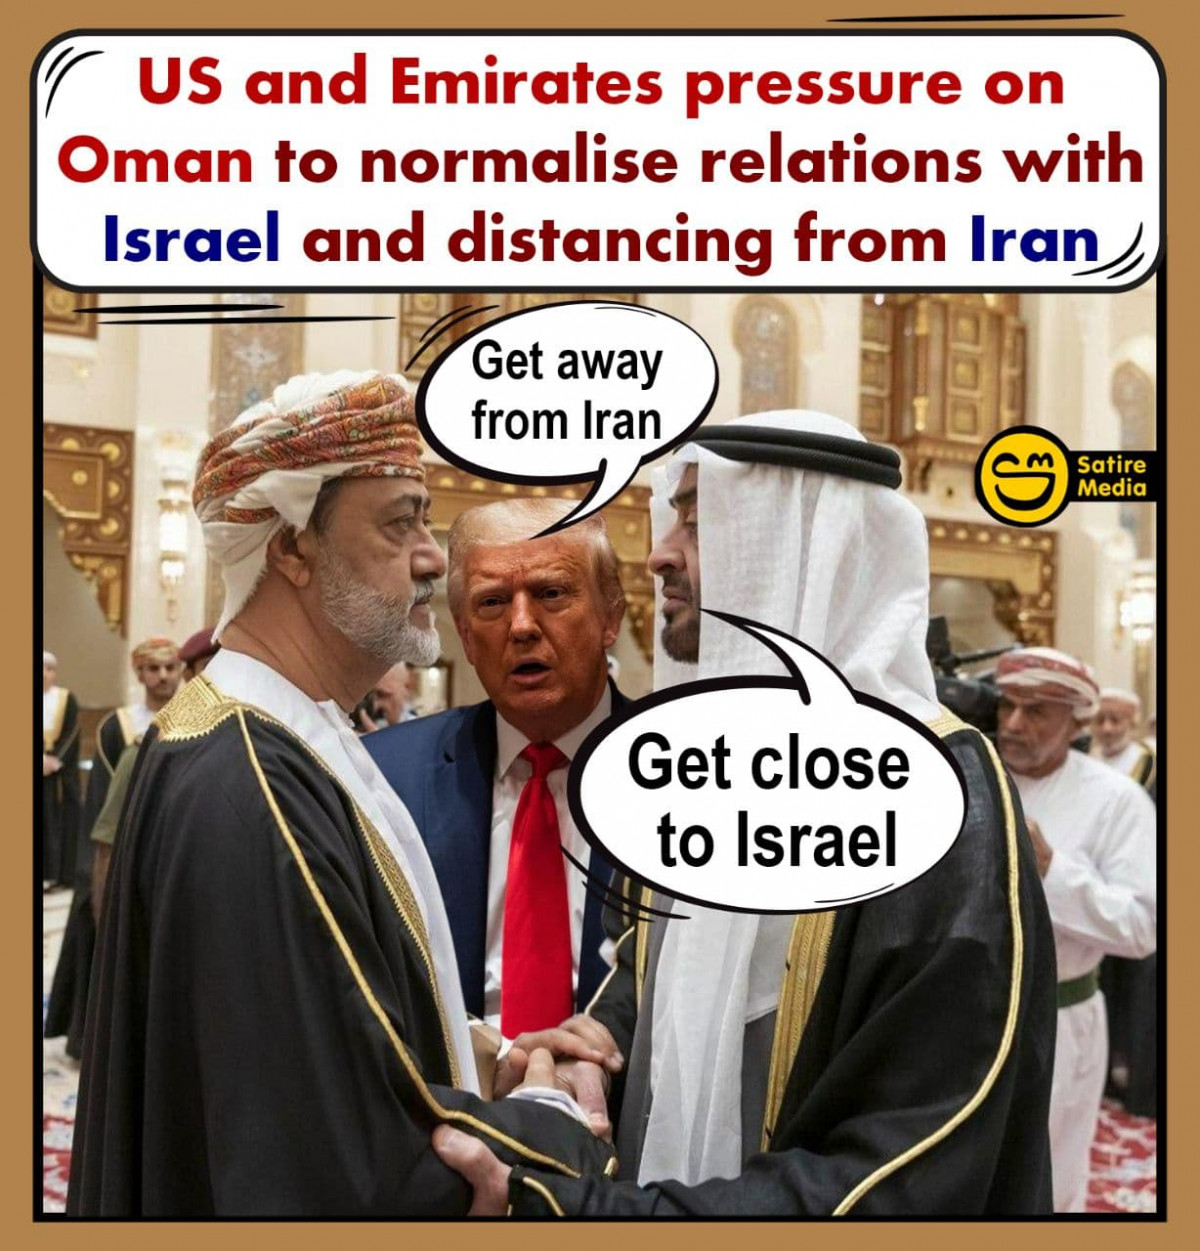 US and Emirates pressure on Oman to normalise relations with Israel and distancing from Iran